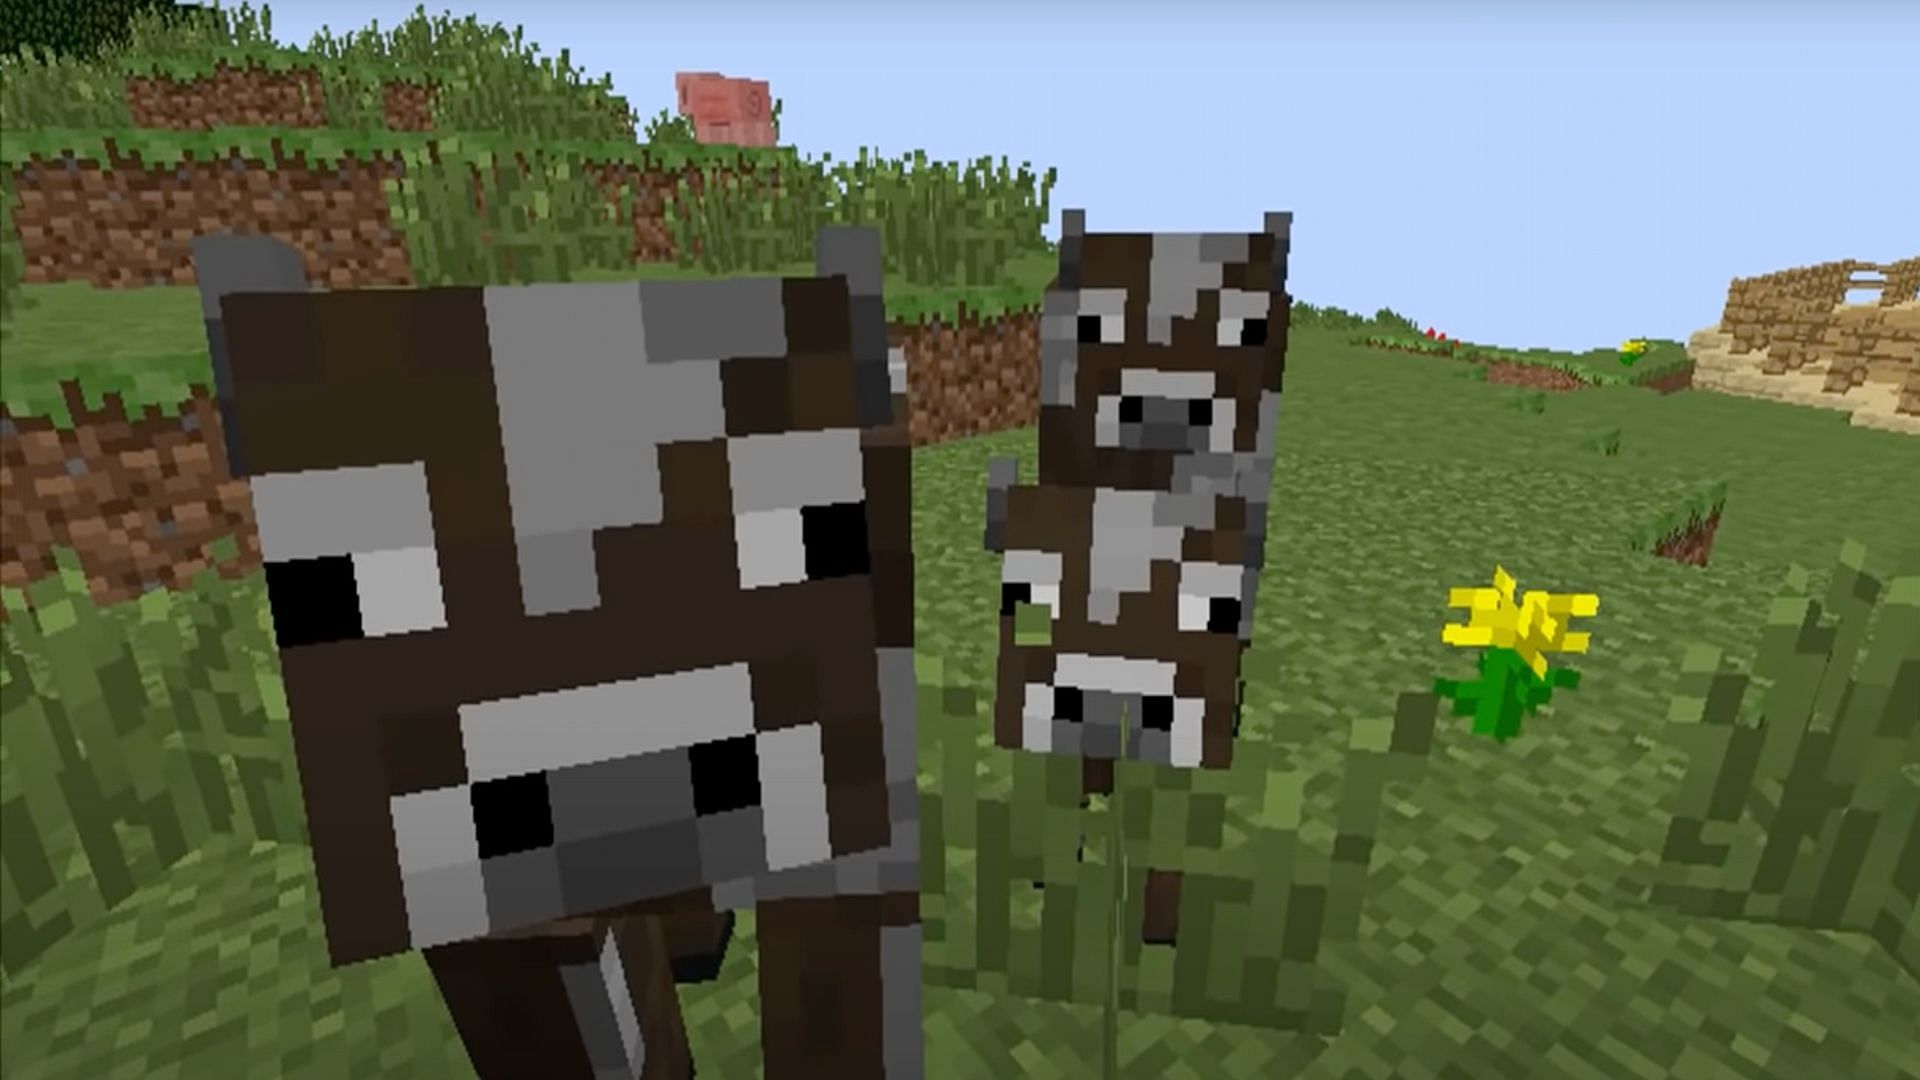 Cows can provide players with a lot of valuable resources in Minecraft (Image via iDeactivateMC/YouTube)